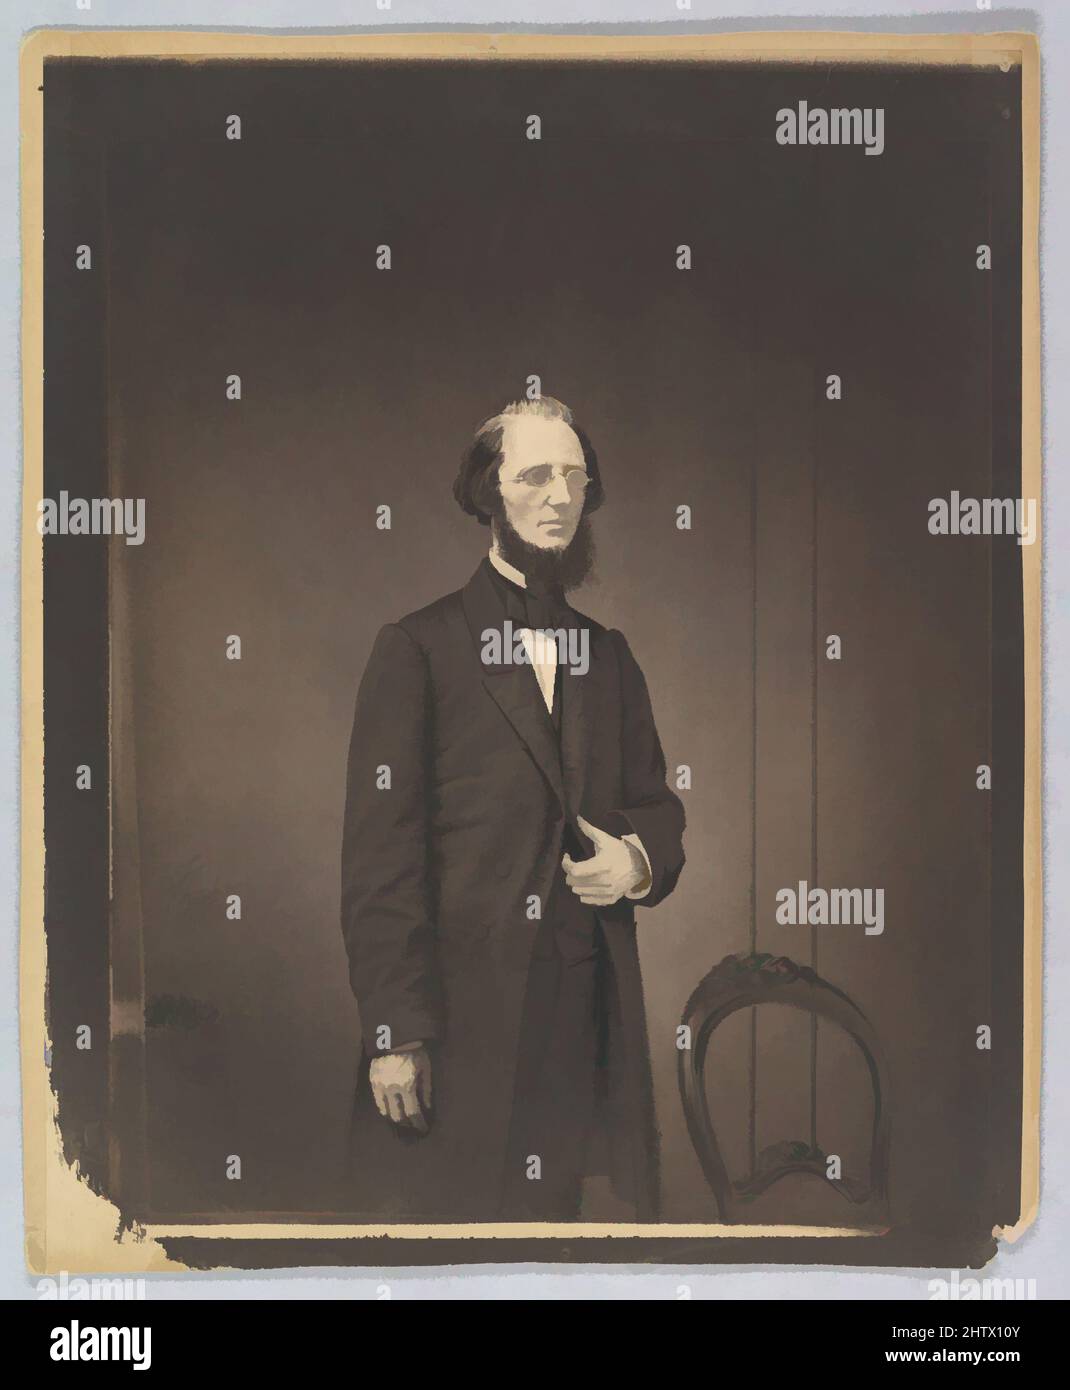 Art inspired by Portrait of a Man, ca. 1857, Salted paper print from glass negative, Mount: 11 3/16 in. × 9 1/8 in. (28.4 × 23.2 cm), Photographs, Mathew B. Brady (American, born Ireland, 1823?–1896 New York), The identity of this soberly dressed man is unknown, but Brady's careful, Classic works modernized by Artotop with a splash of modernity. Shapes, color and value, eye-catching visual impact on art. Emotions through freedom of artworks in a contemporary way. A timeless message pursuing a wildly creative new direction. Artists turning to the digital medium and creating the Artotop NFT Stock Photo